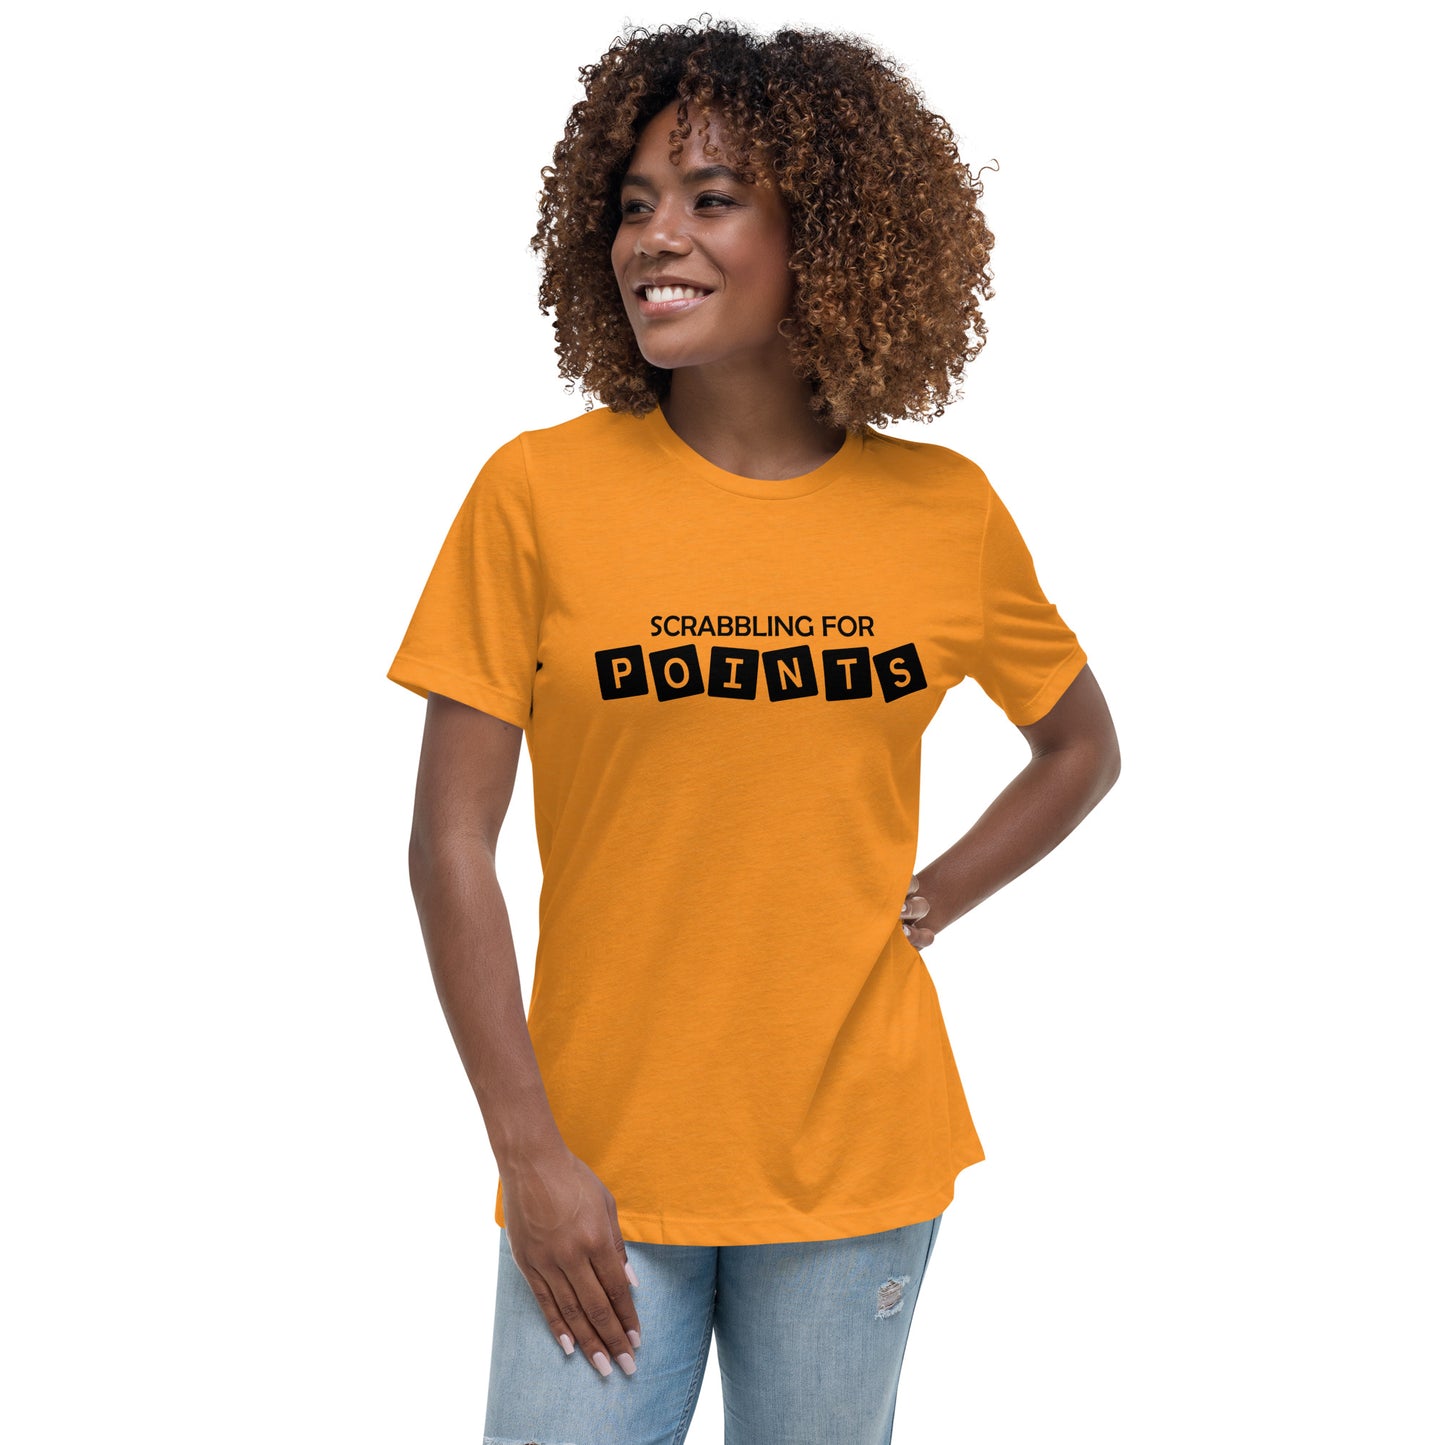 Scrabbling for Points Women's Relaxed T-Shirt